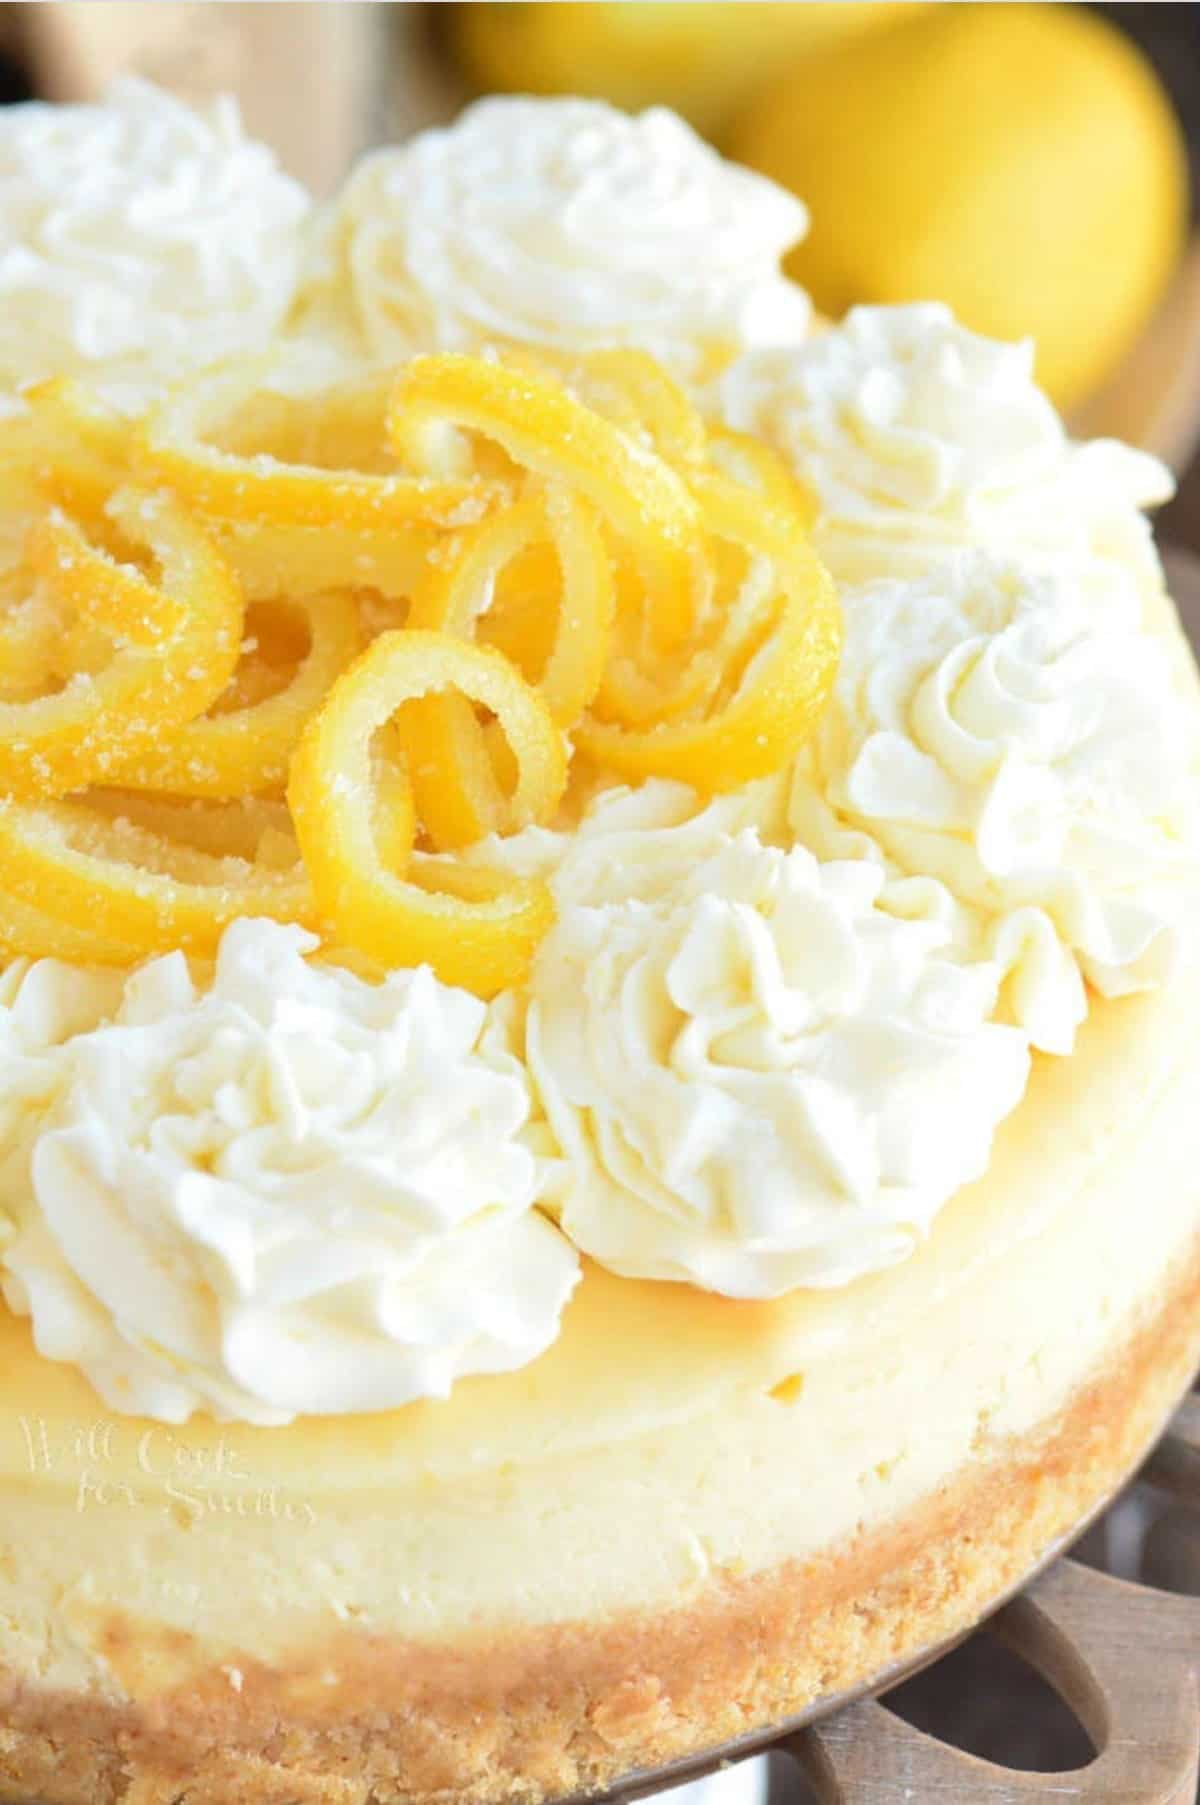 candied lemon peels and frosting top a lemon cheesecake.